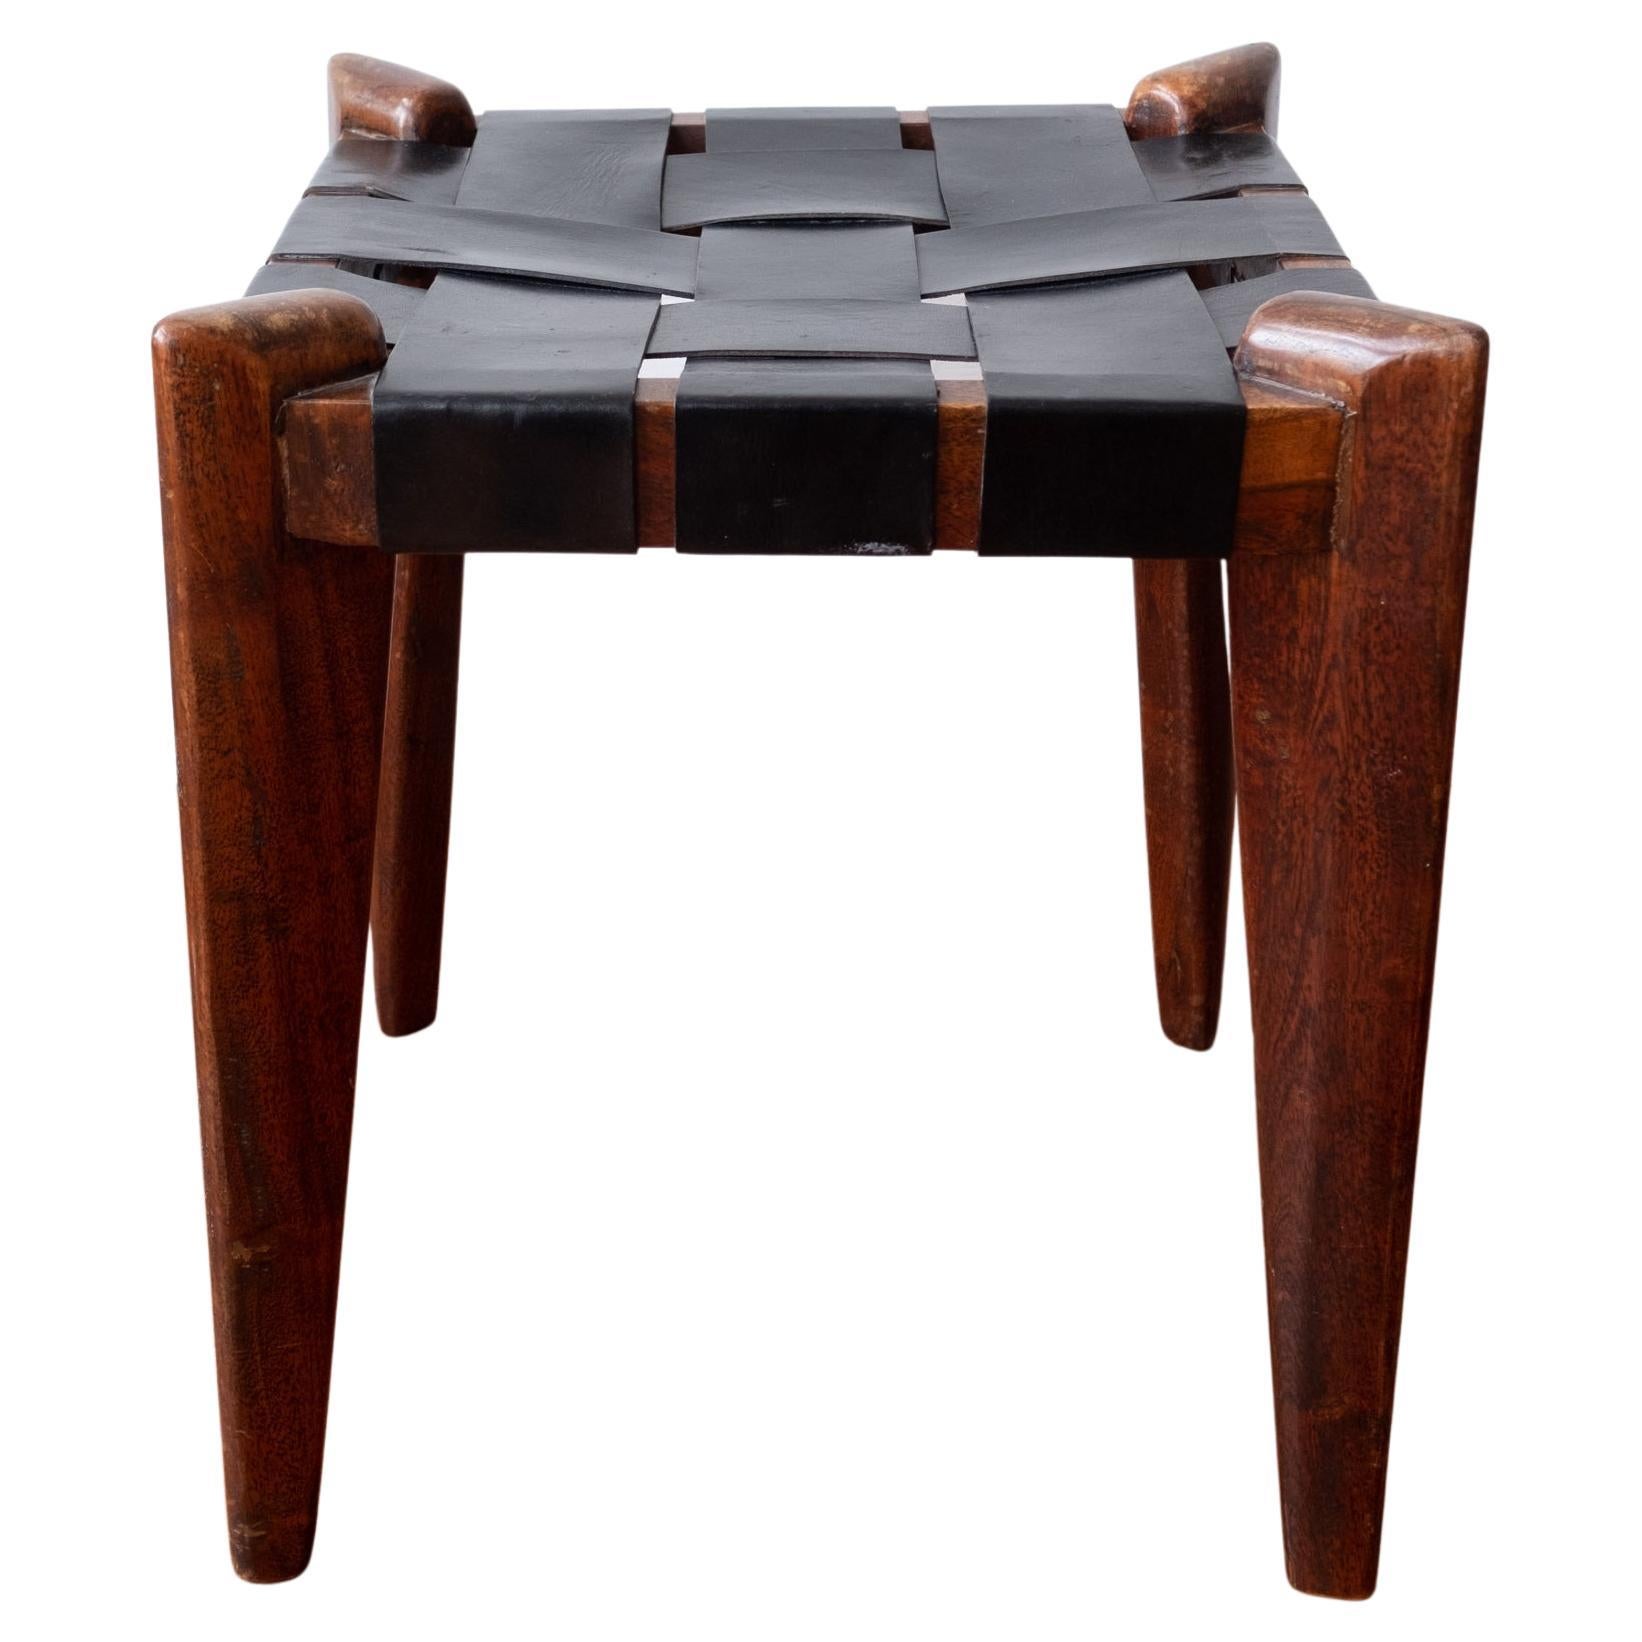 Woven Leather and Solid Teak Stool